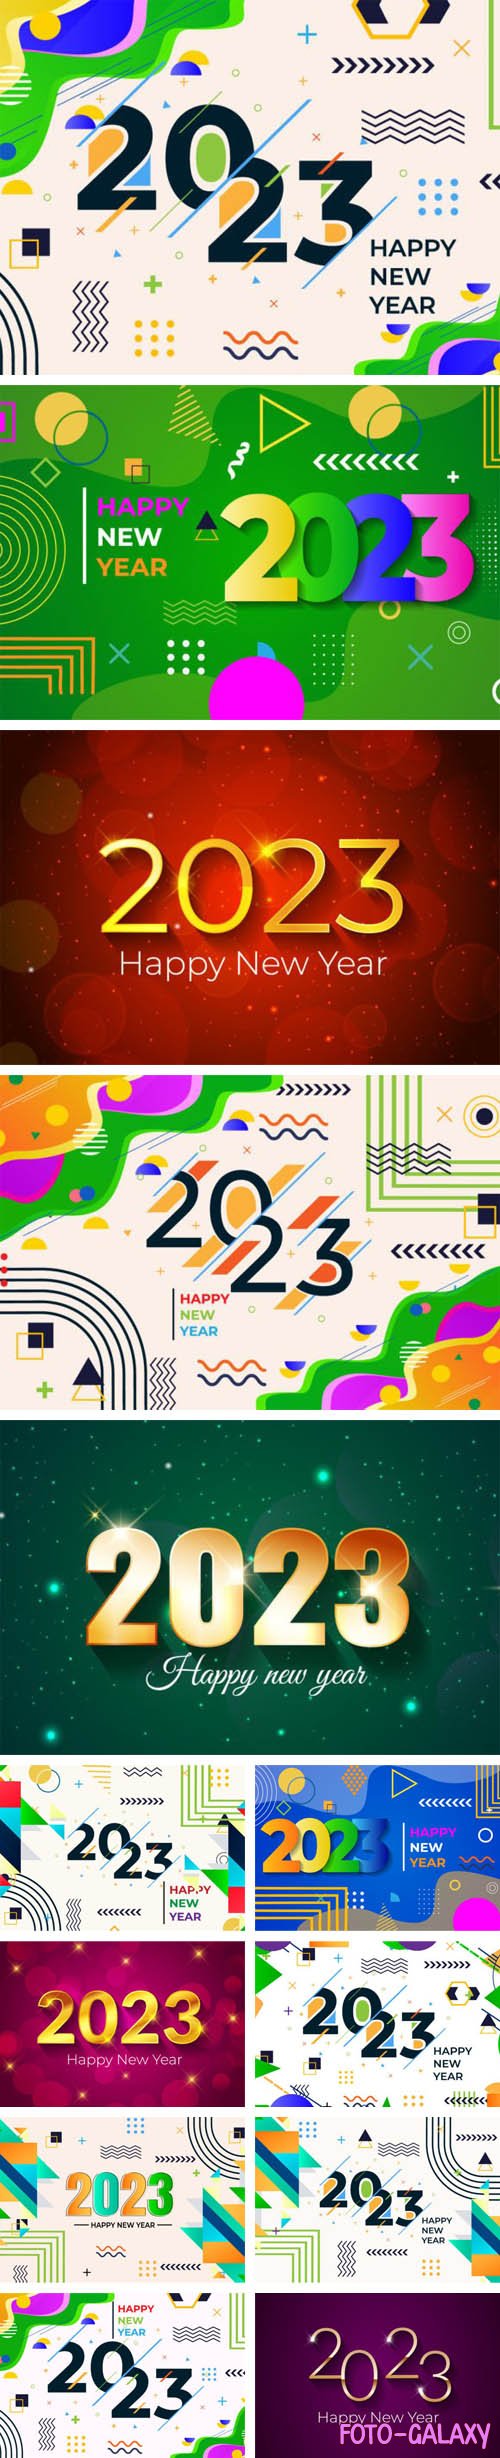 Happy New Year 2023 - 10+ Abstract Backgrounds Vector Templates